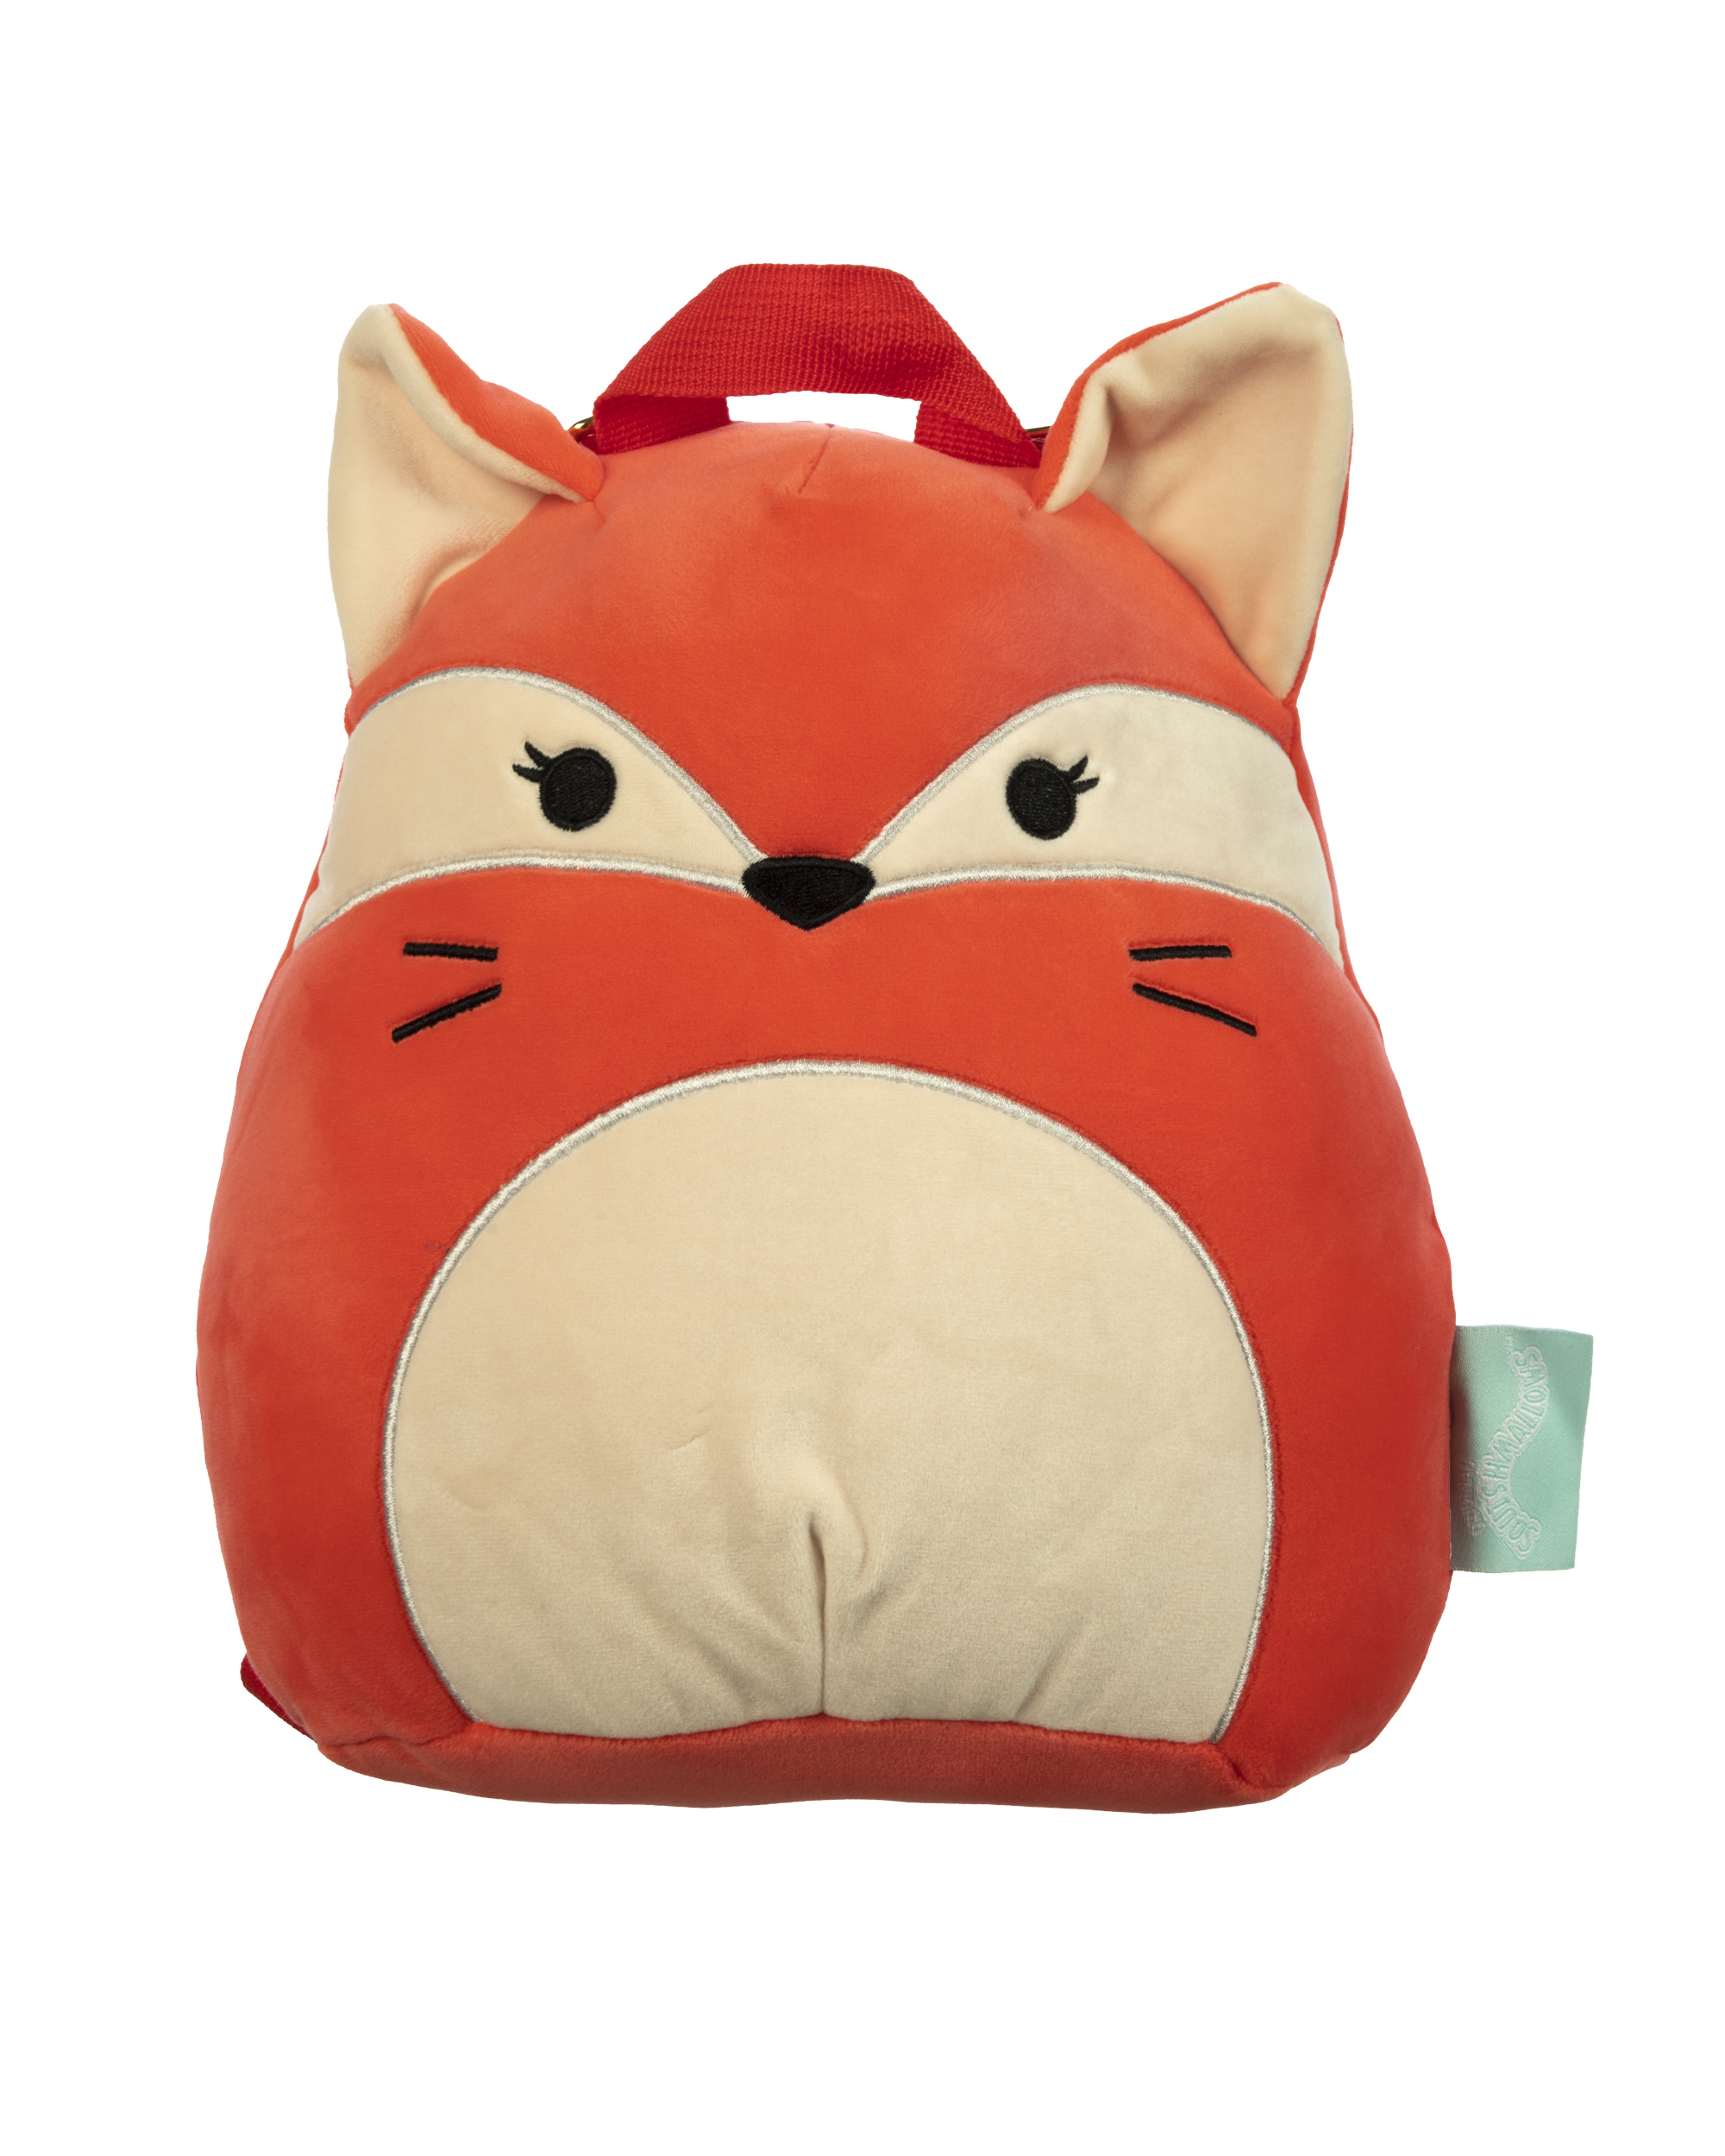 Squishmallows Fifi Fox 2pc  Travel Set with 18" Luggage and 10" Plush Backpack - image 4 of 9